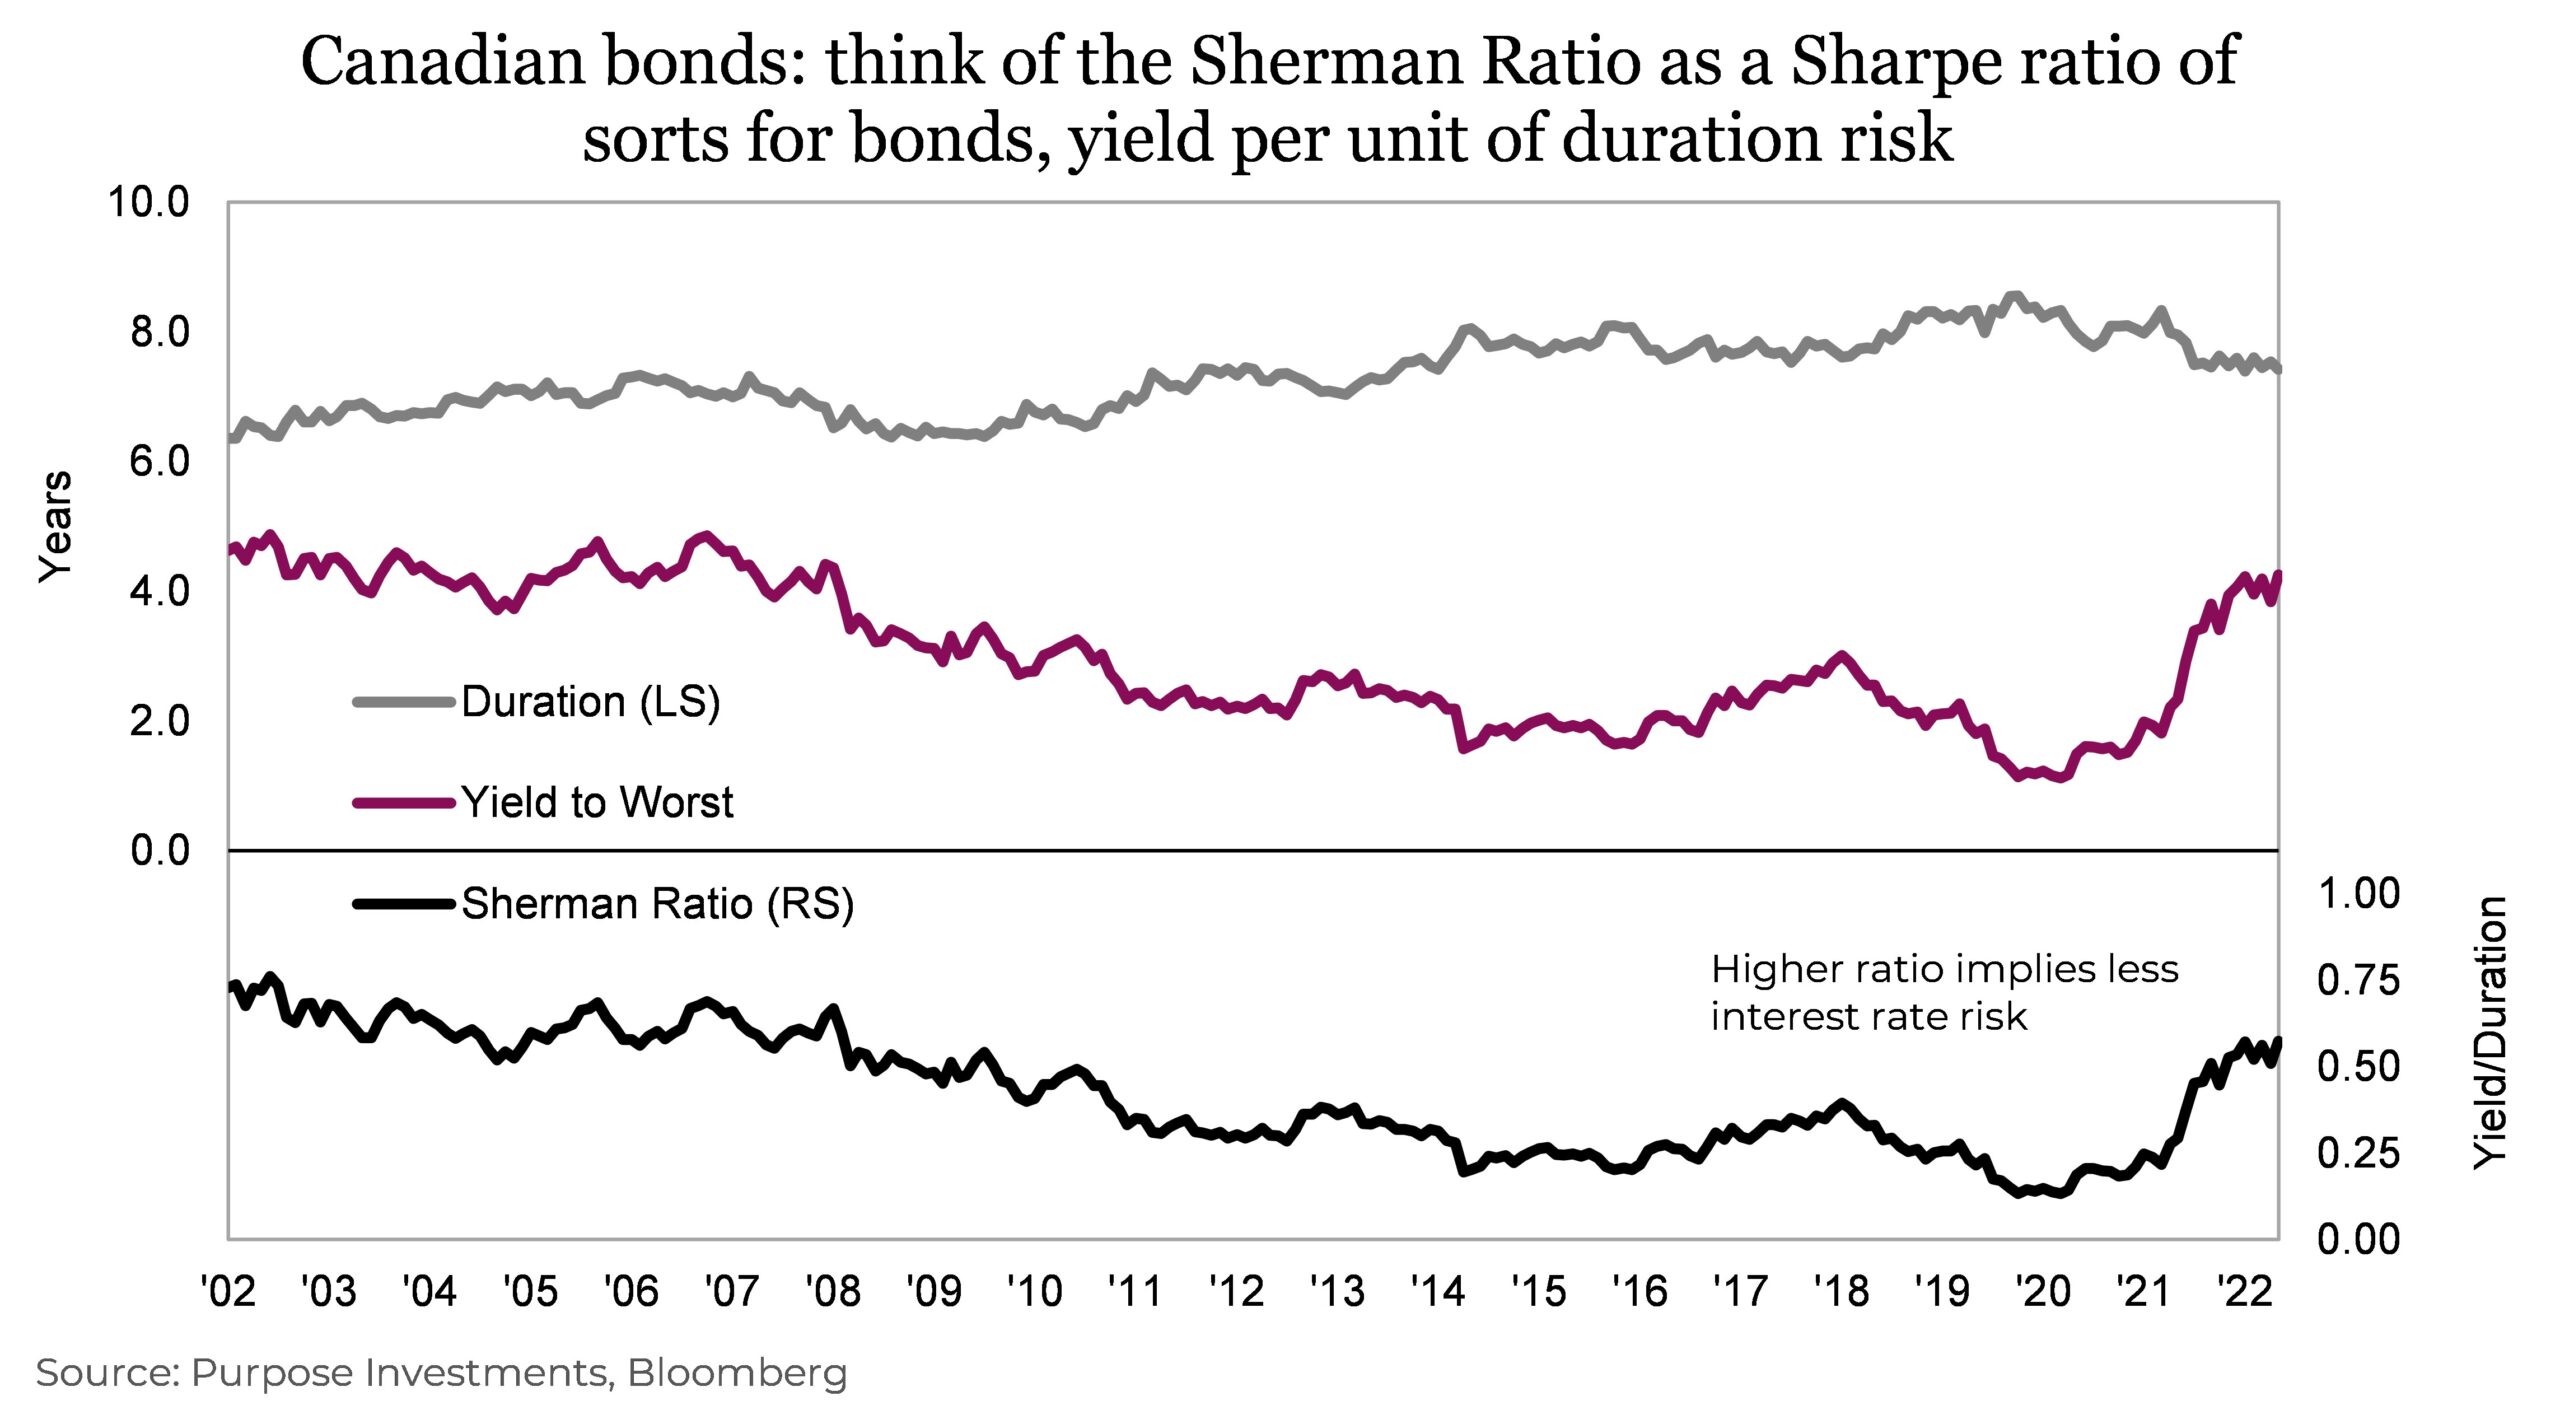 Canadian bonds think of the Sherman Ratio as a Sharpe ratio of sorts for bonds, yield per unit of duration risk